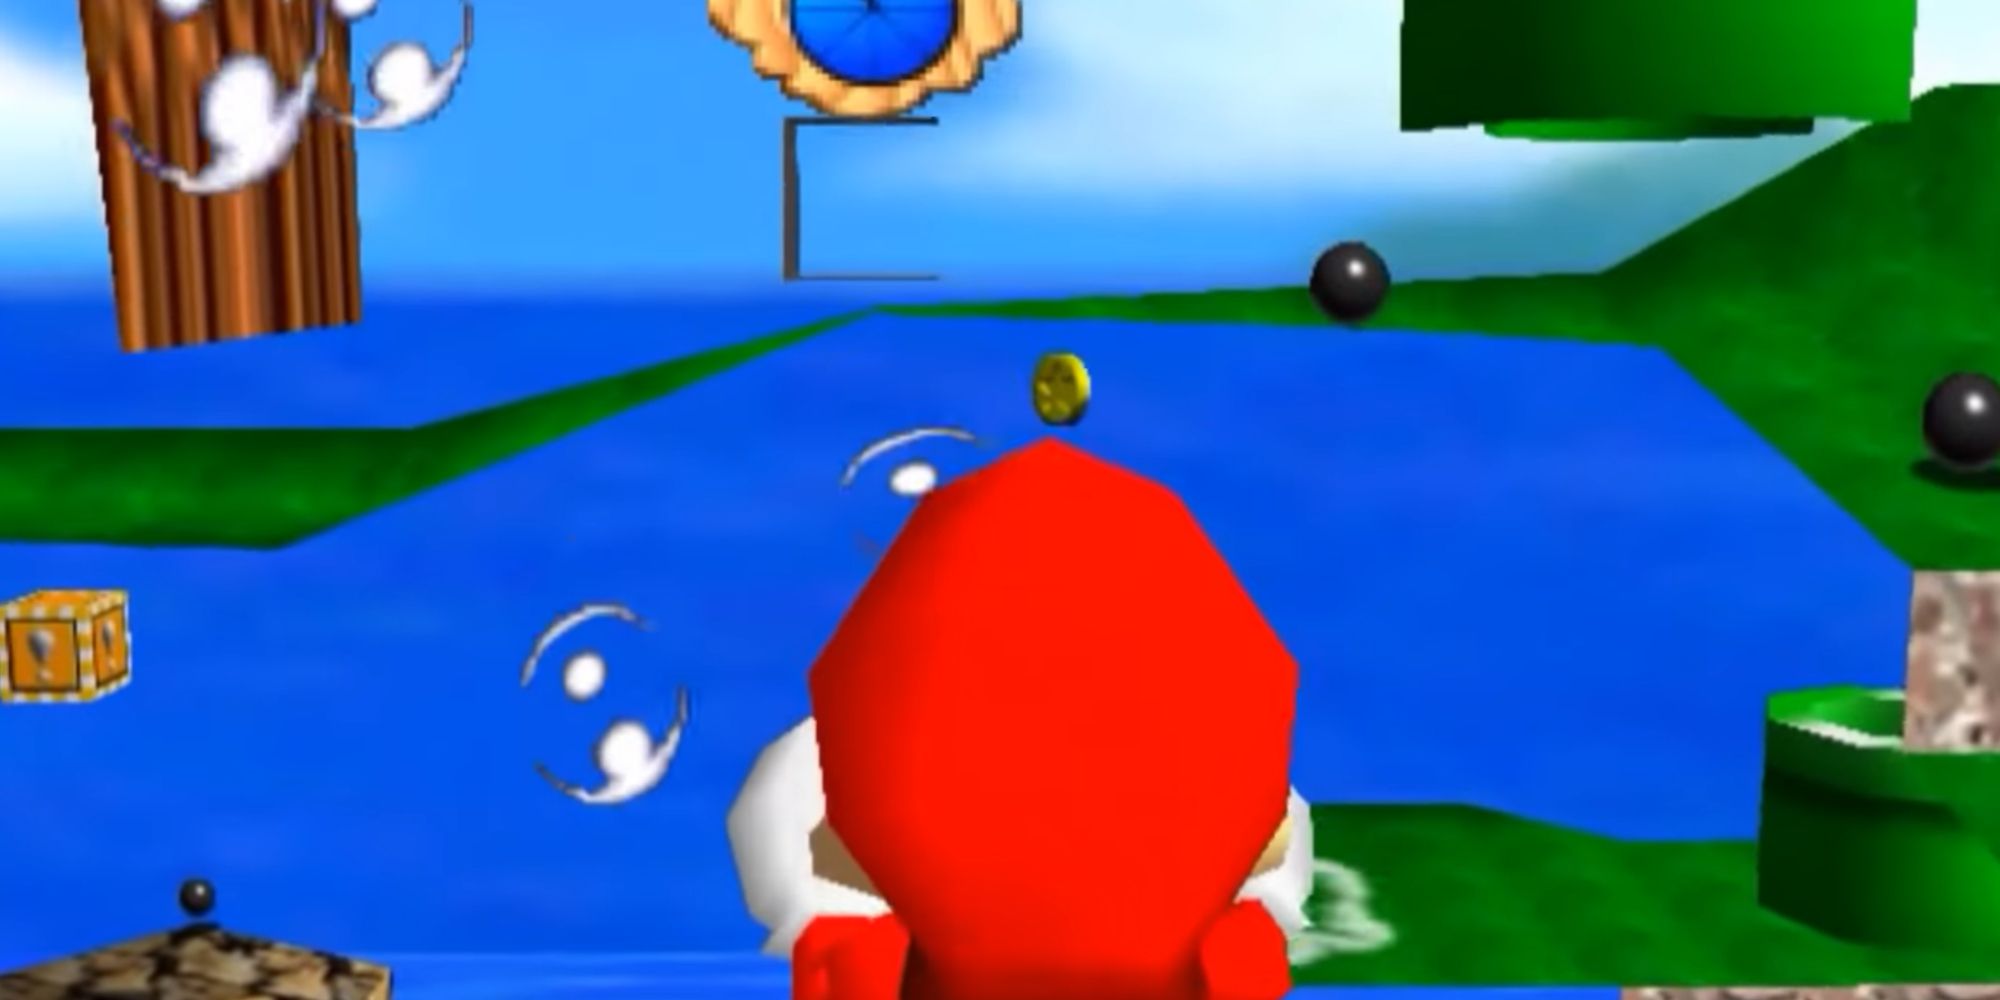 Super Mario 64 glitching out to reach the impossible coin